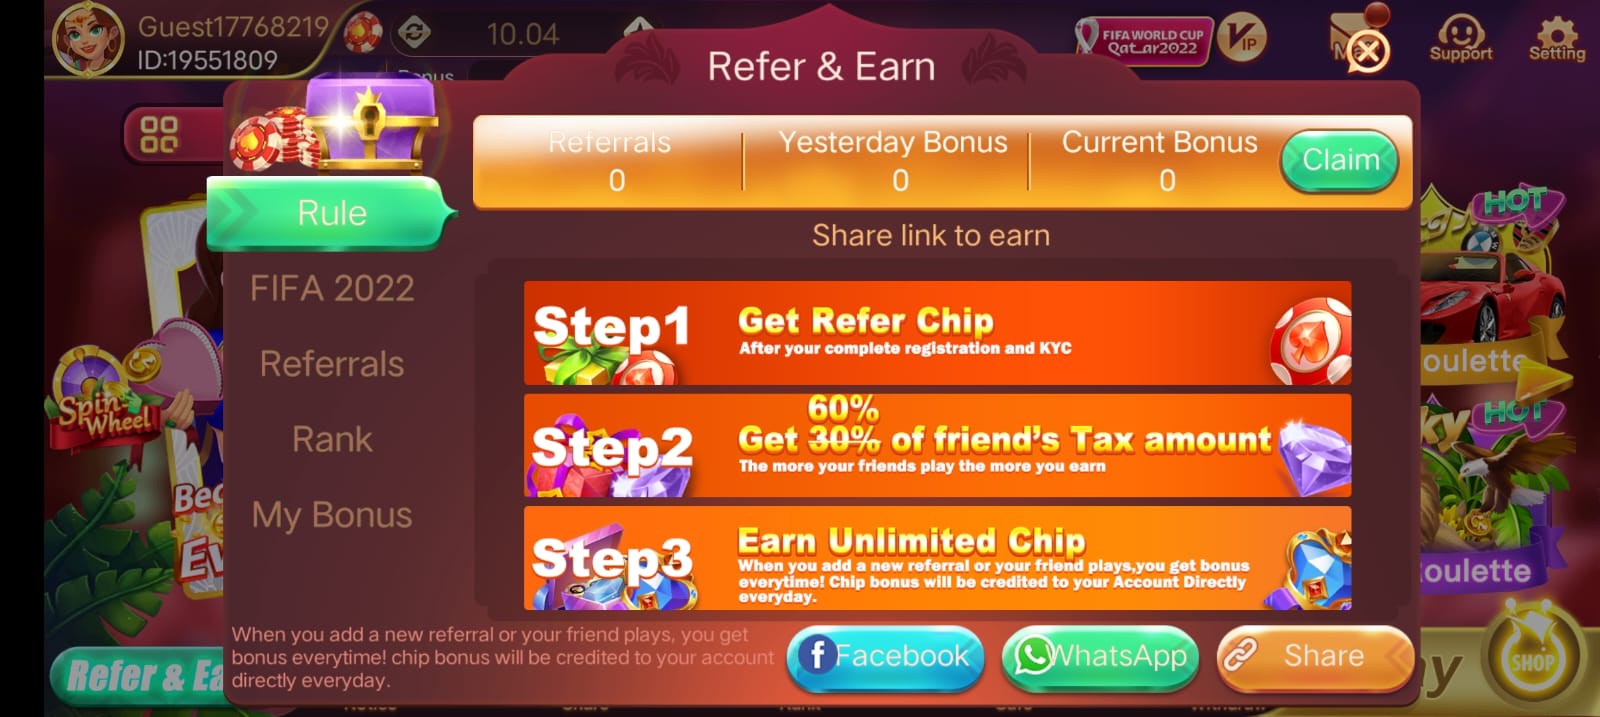 REFER AND EARN IN RUMMY NABOB APP